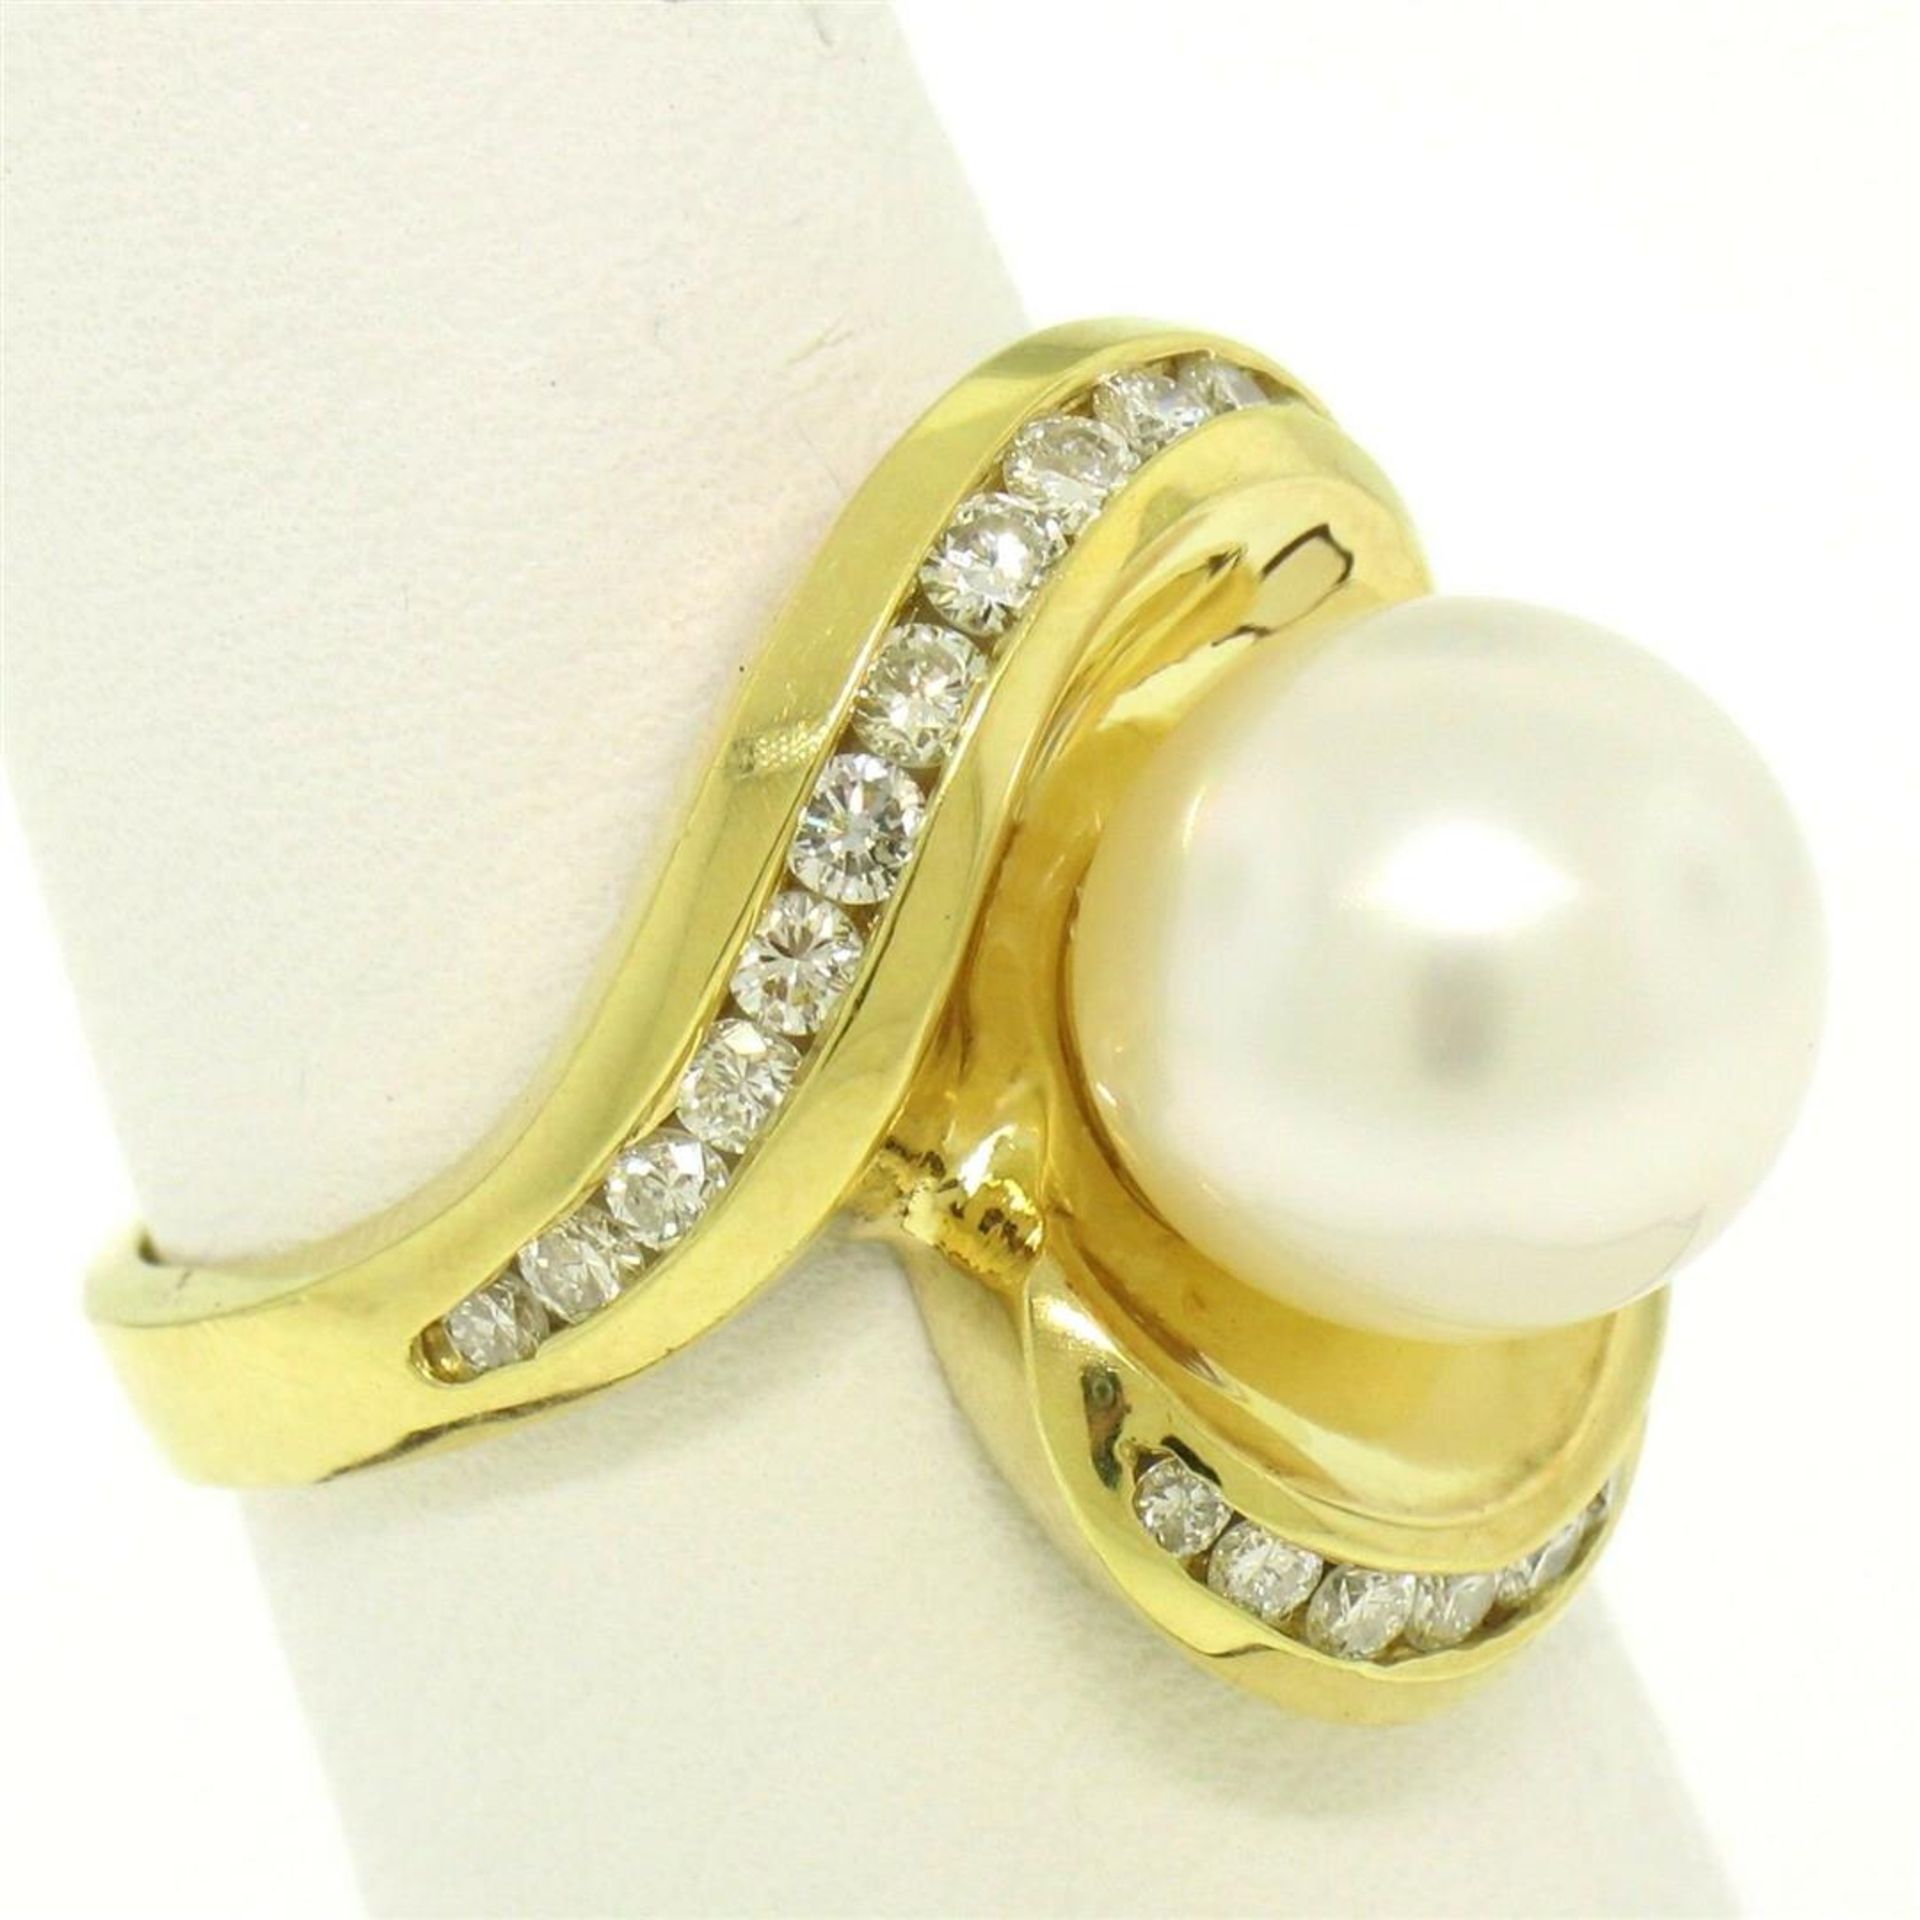 Large 18k Yellow Gold 10.6mm Round White Pearl Solitaire & Diamond Cocktail Ring - Image 2 of 8